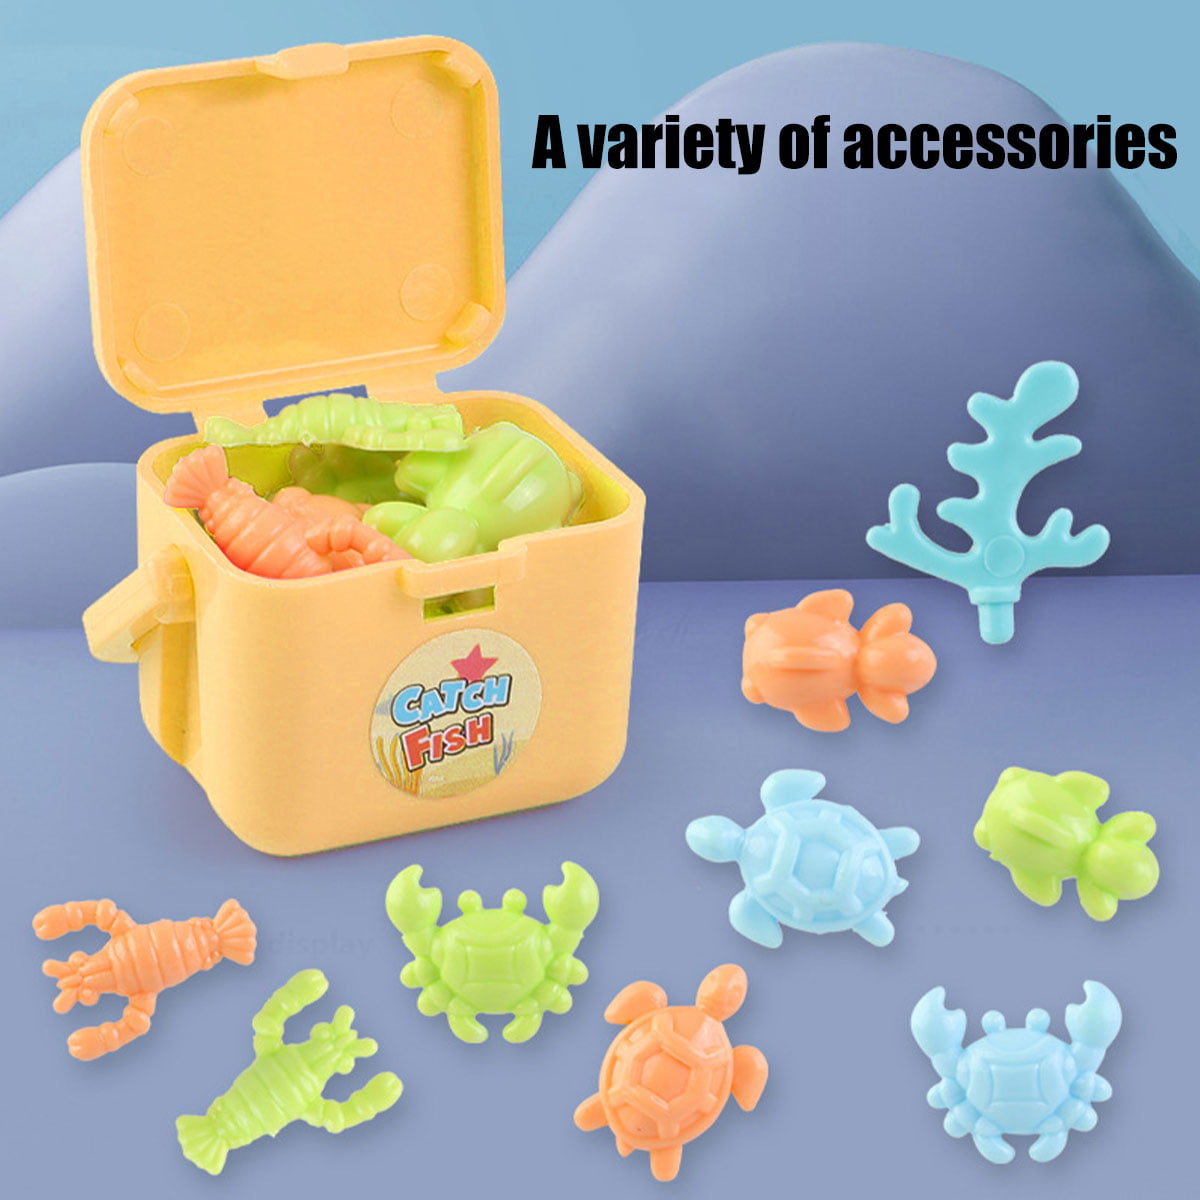 Uszeoka Mini Claw Machine for Kids,Toy Grabber,24 Tiny Stuff  prizes,Dinosaur prizes Game,Miniature Things,Suitable for Birthday Gifts  for 3,4,5,6,7